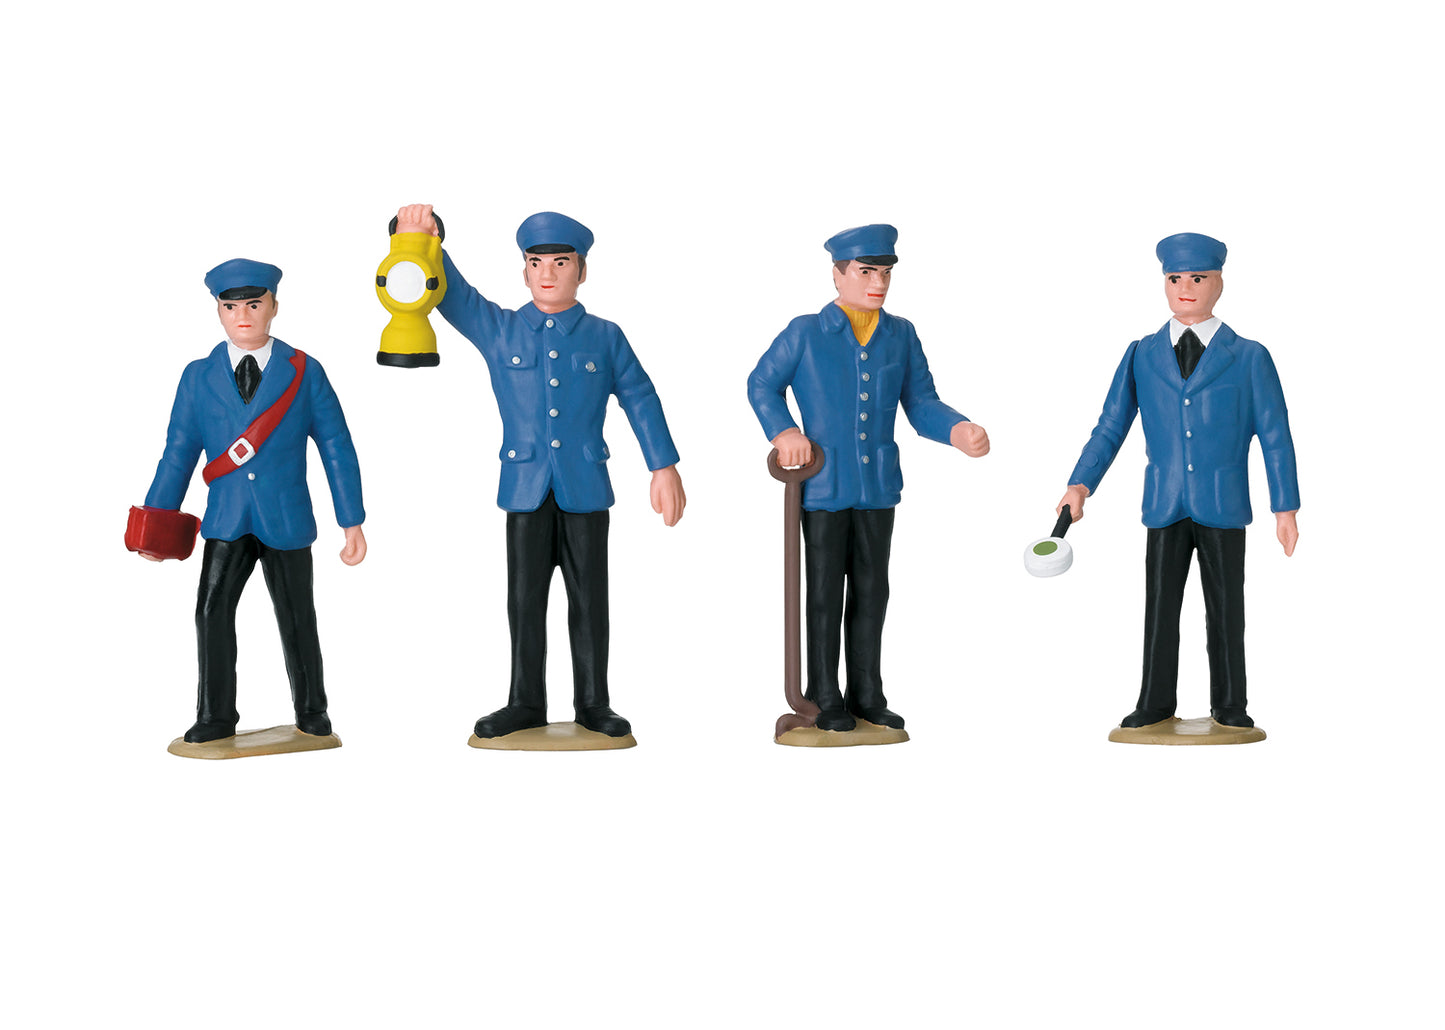 Set of Figures for Railroad Workers in Germany - 53001